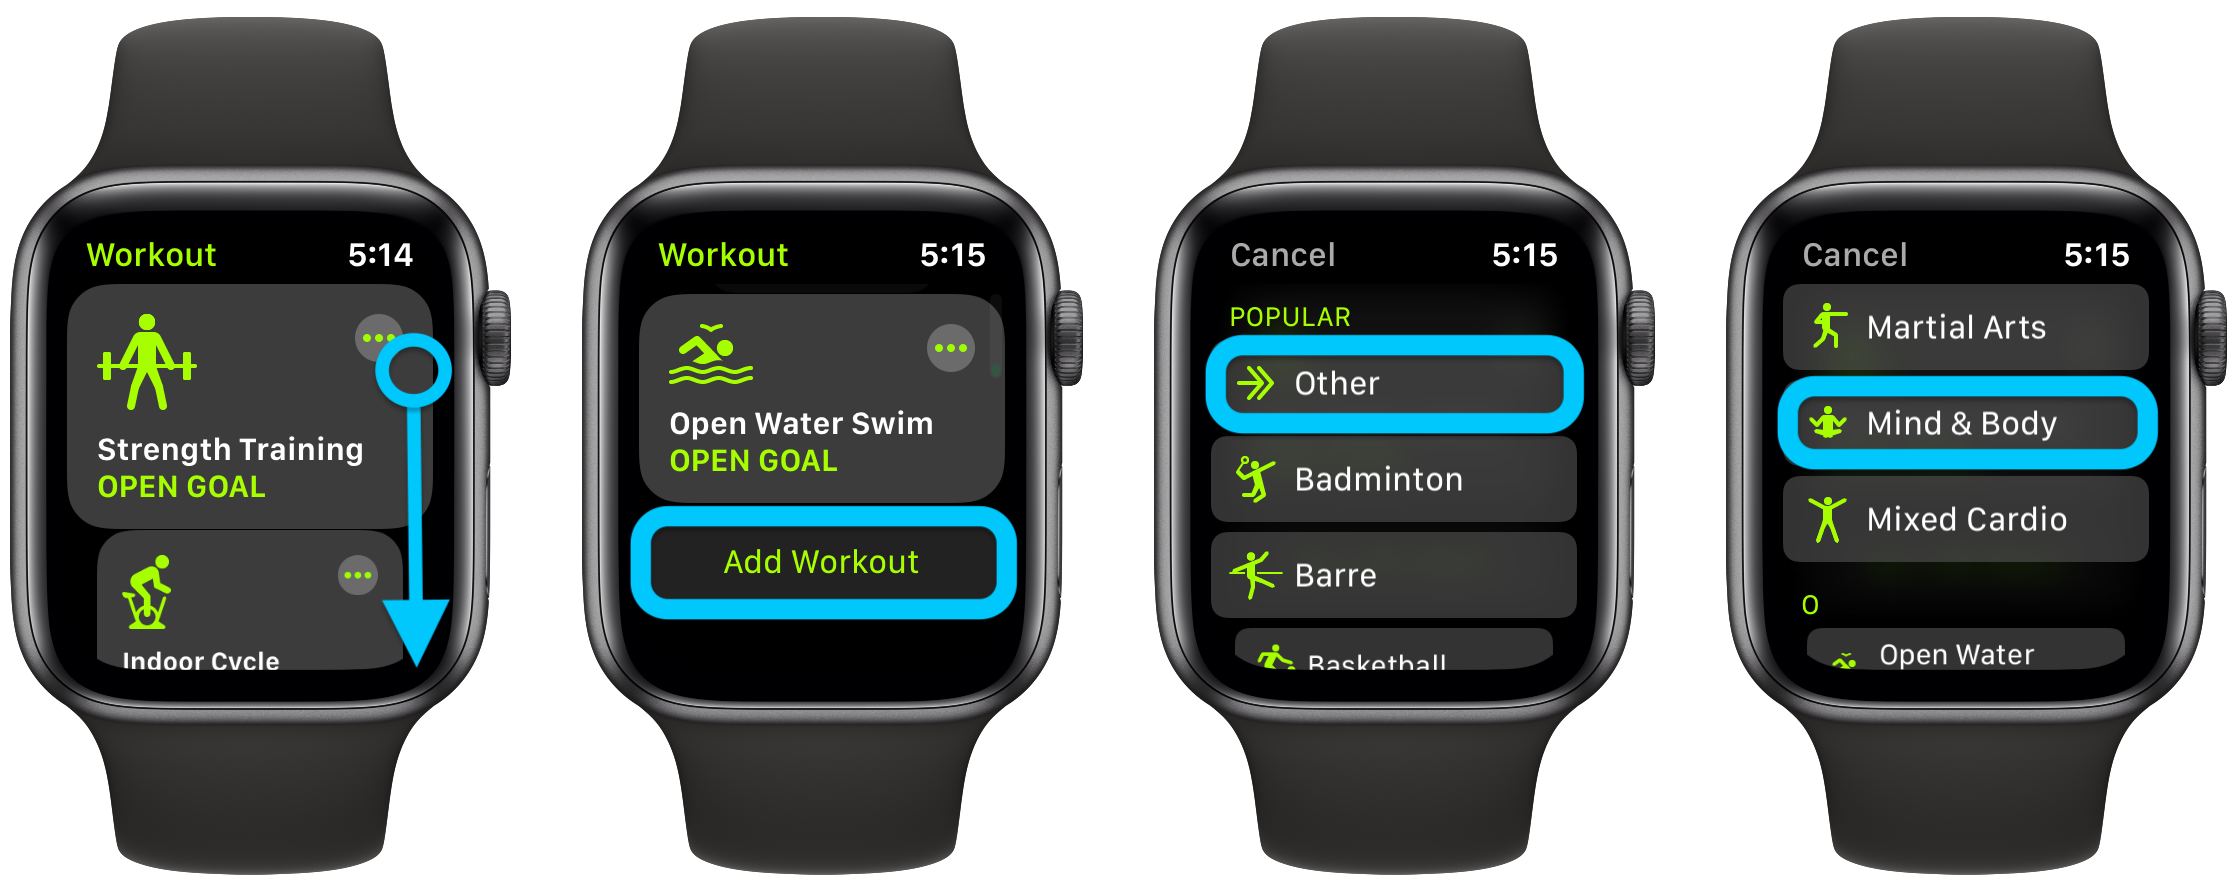 How to change Apple Watch Move goal Exercise goal